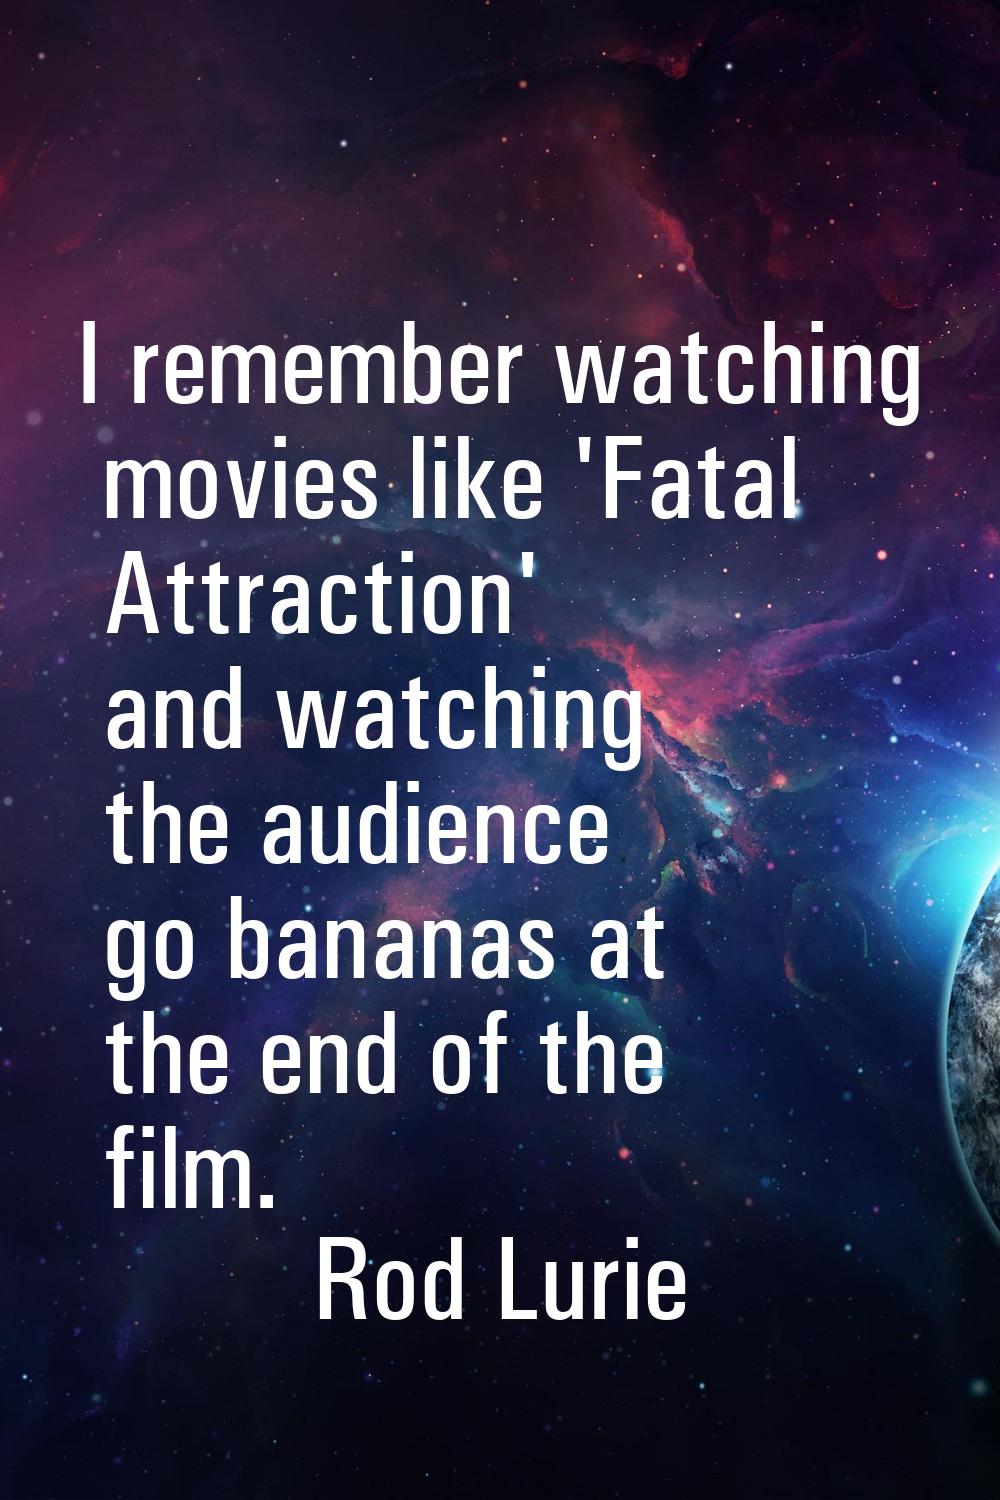 I remember watching movies like 'Fatal Attraction' and watching the audience go bananas at the end 